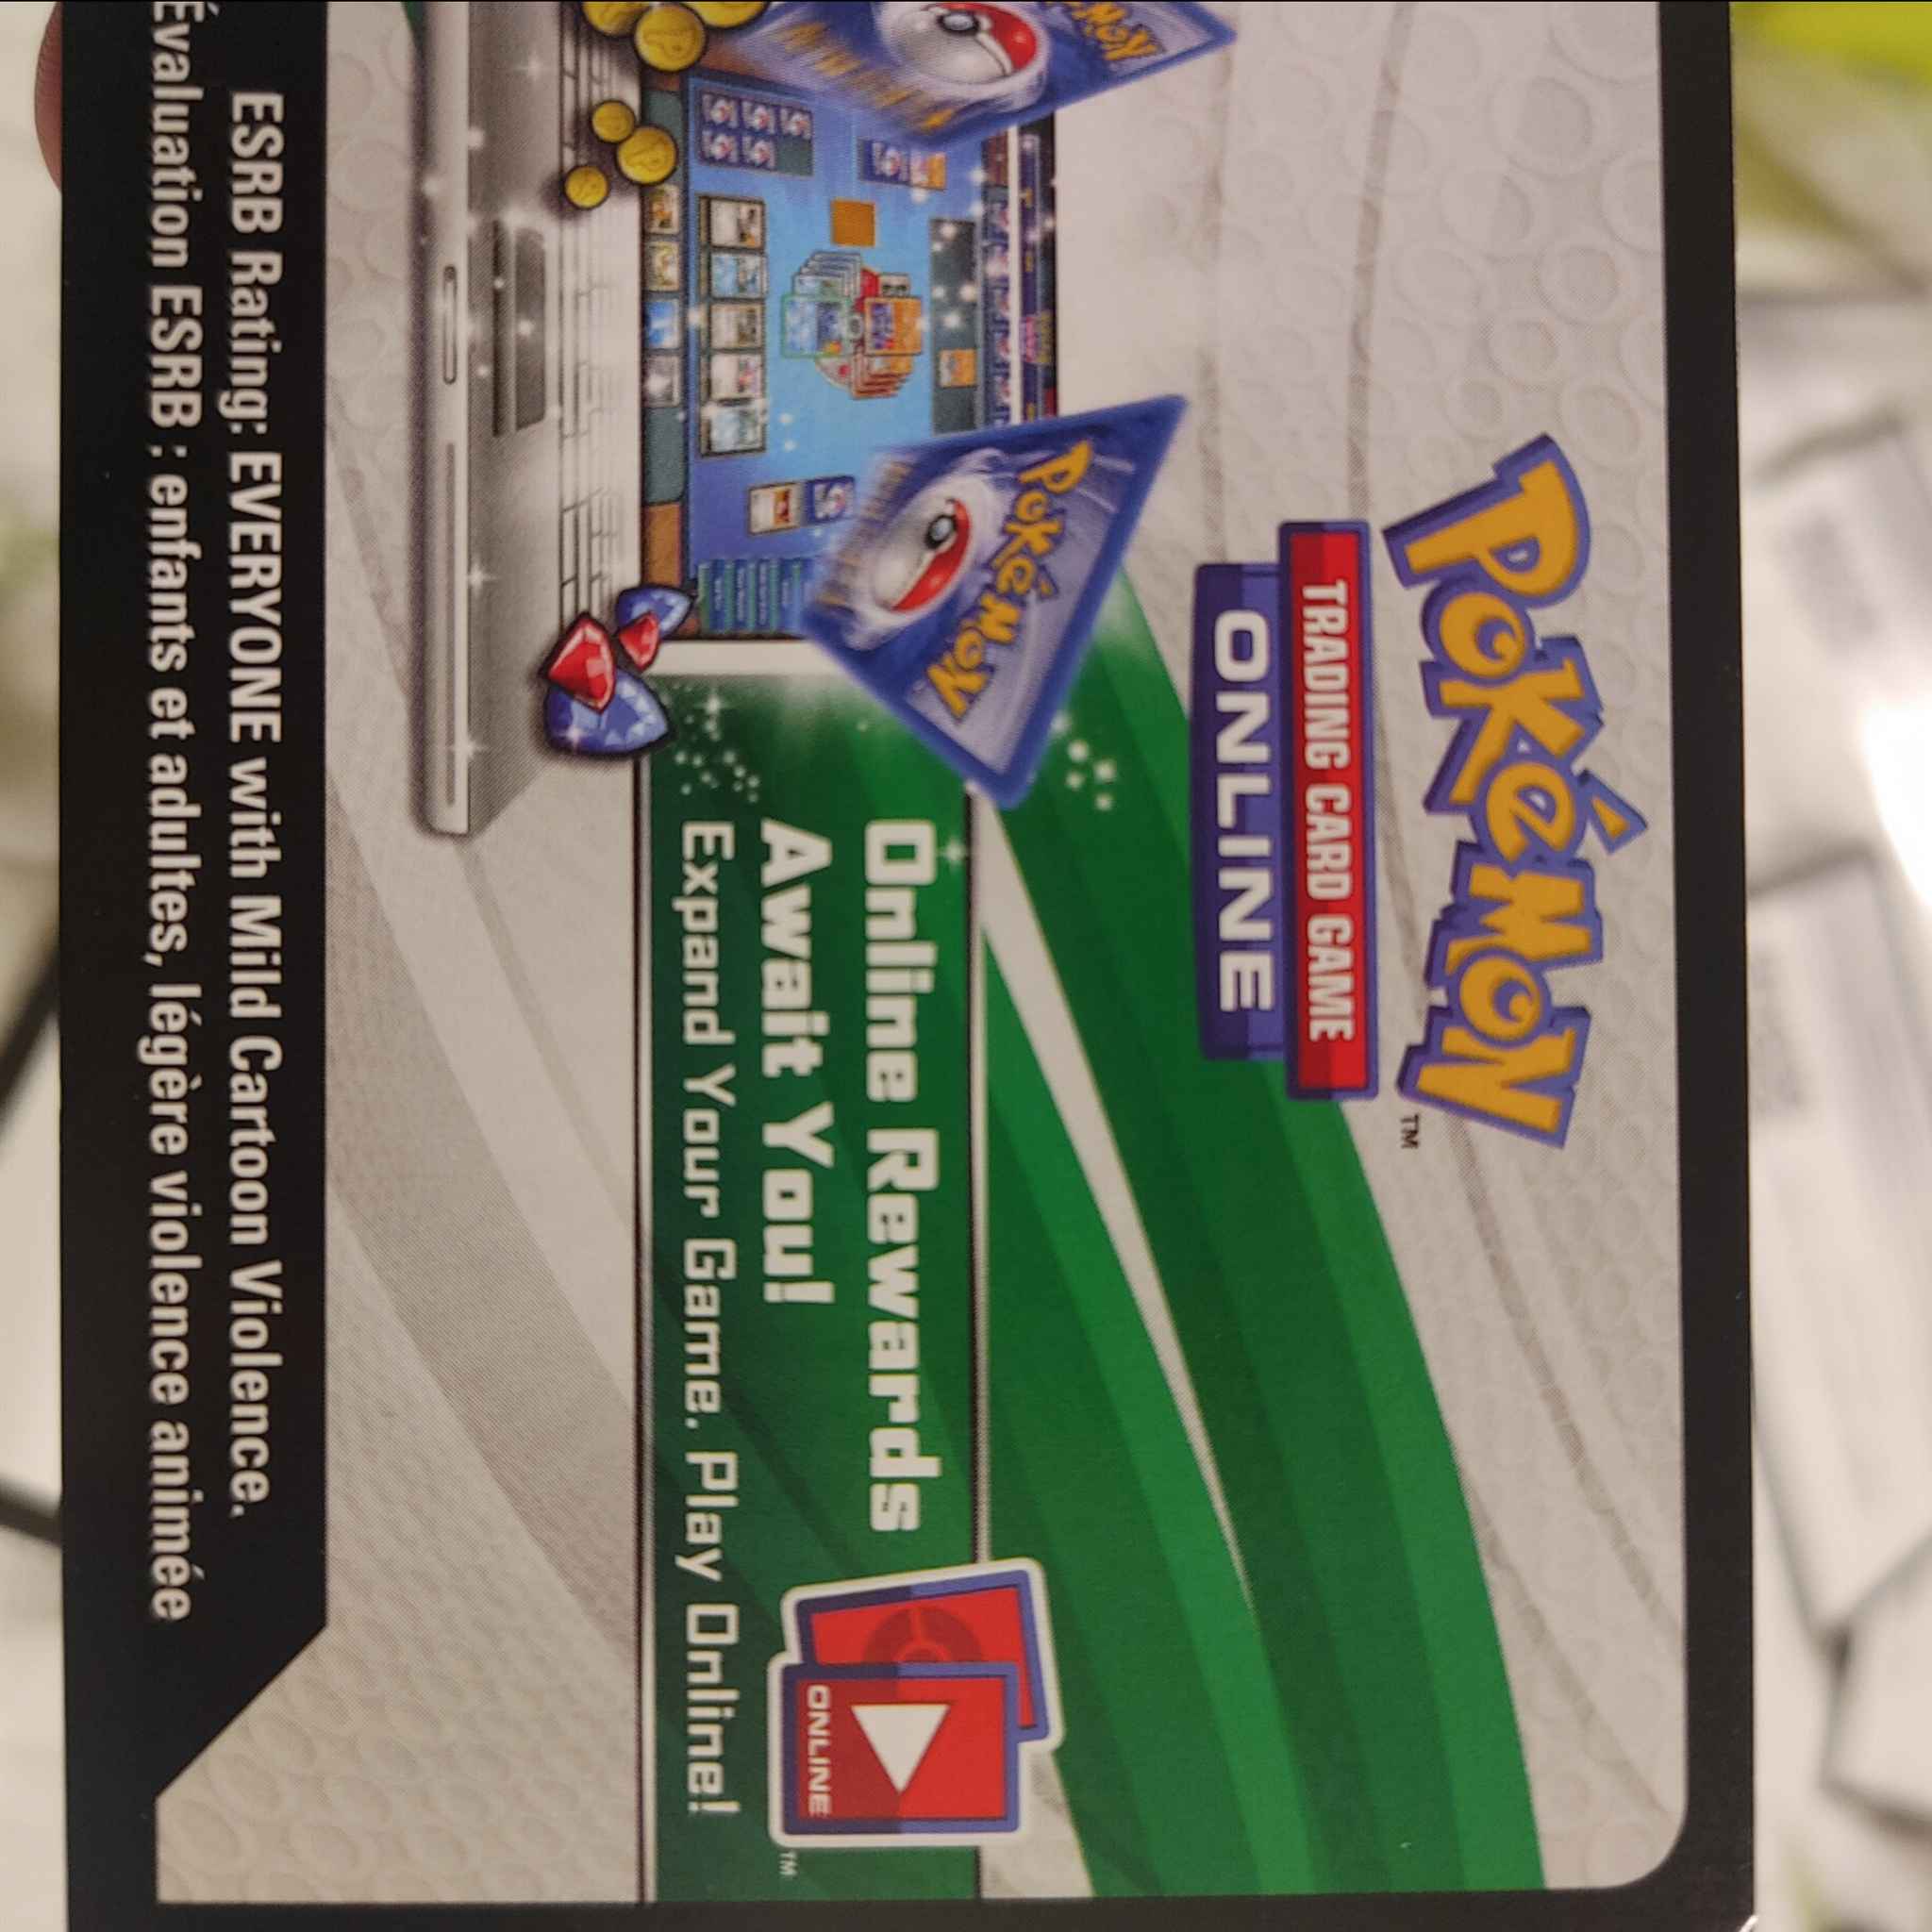 1 Pokemon Champion's Path Collection Dubwool V Online Code *EMAIL*